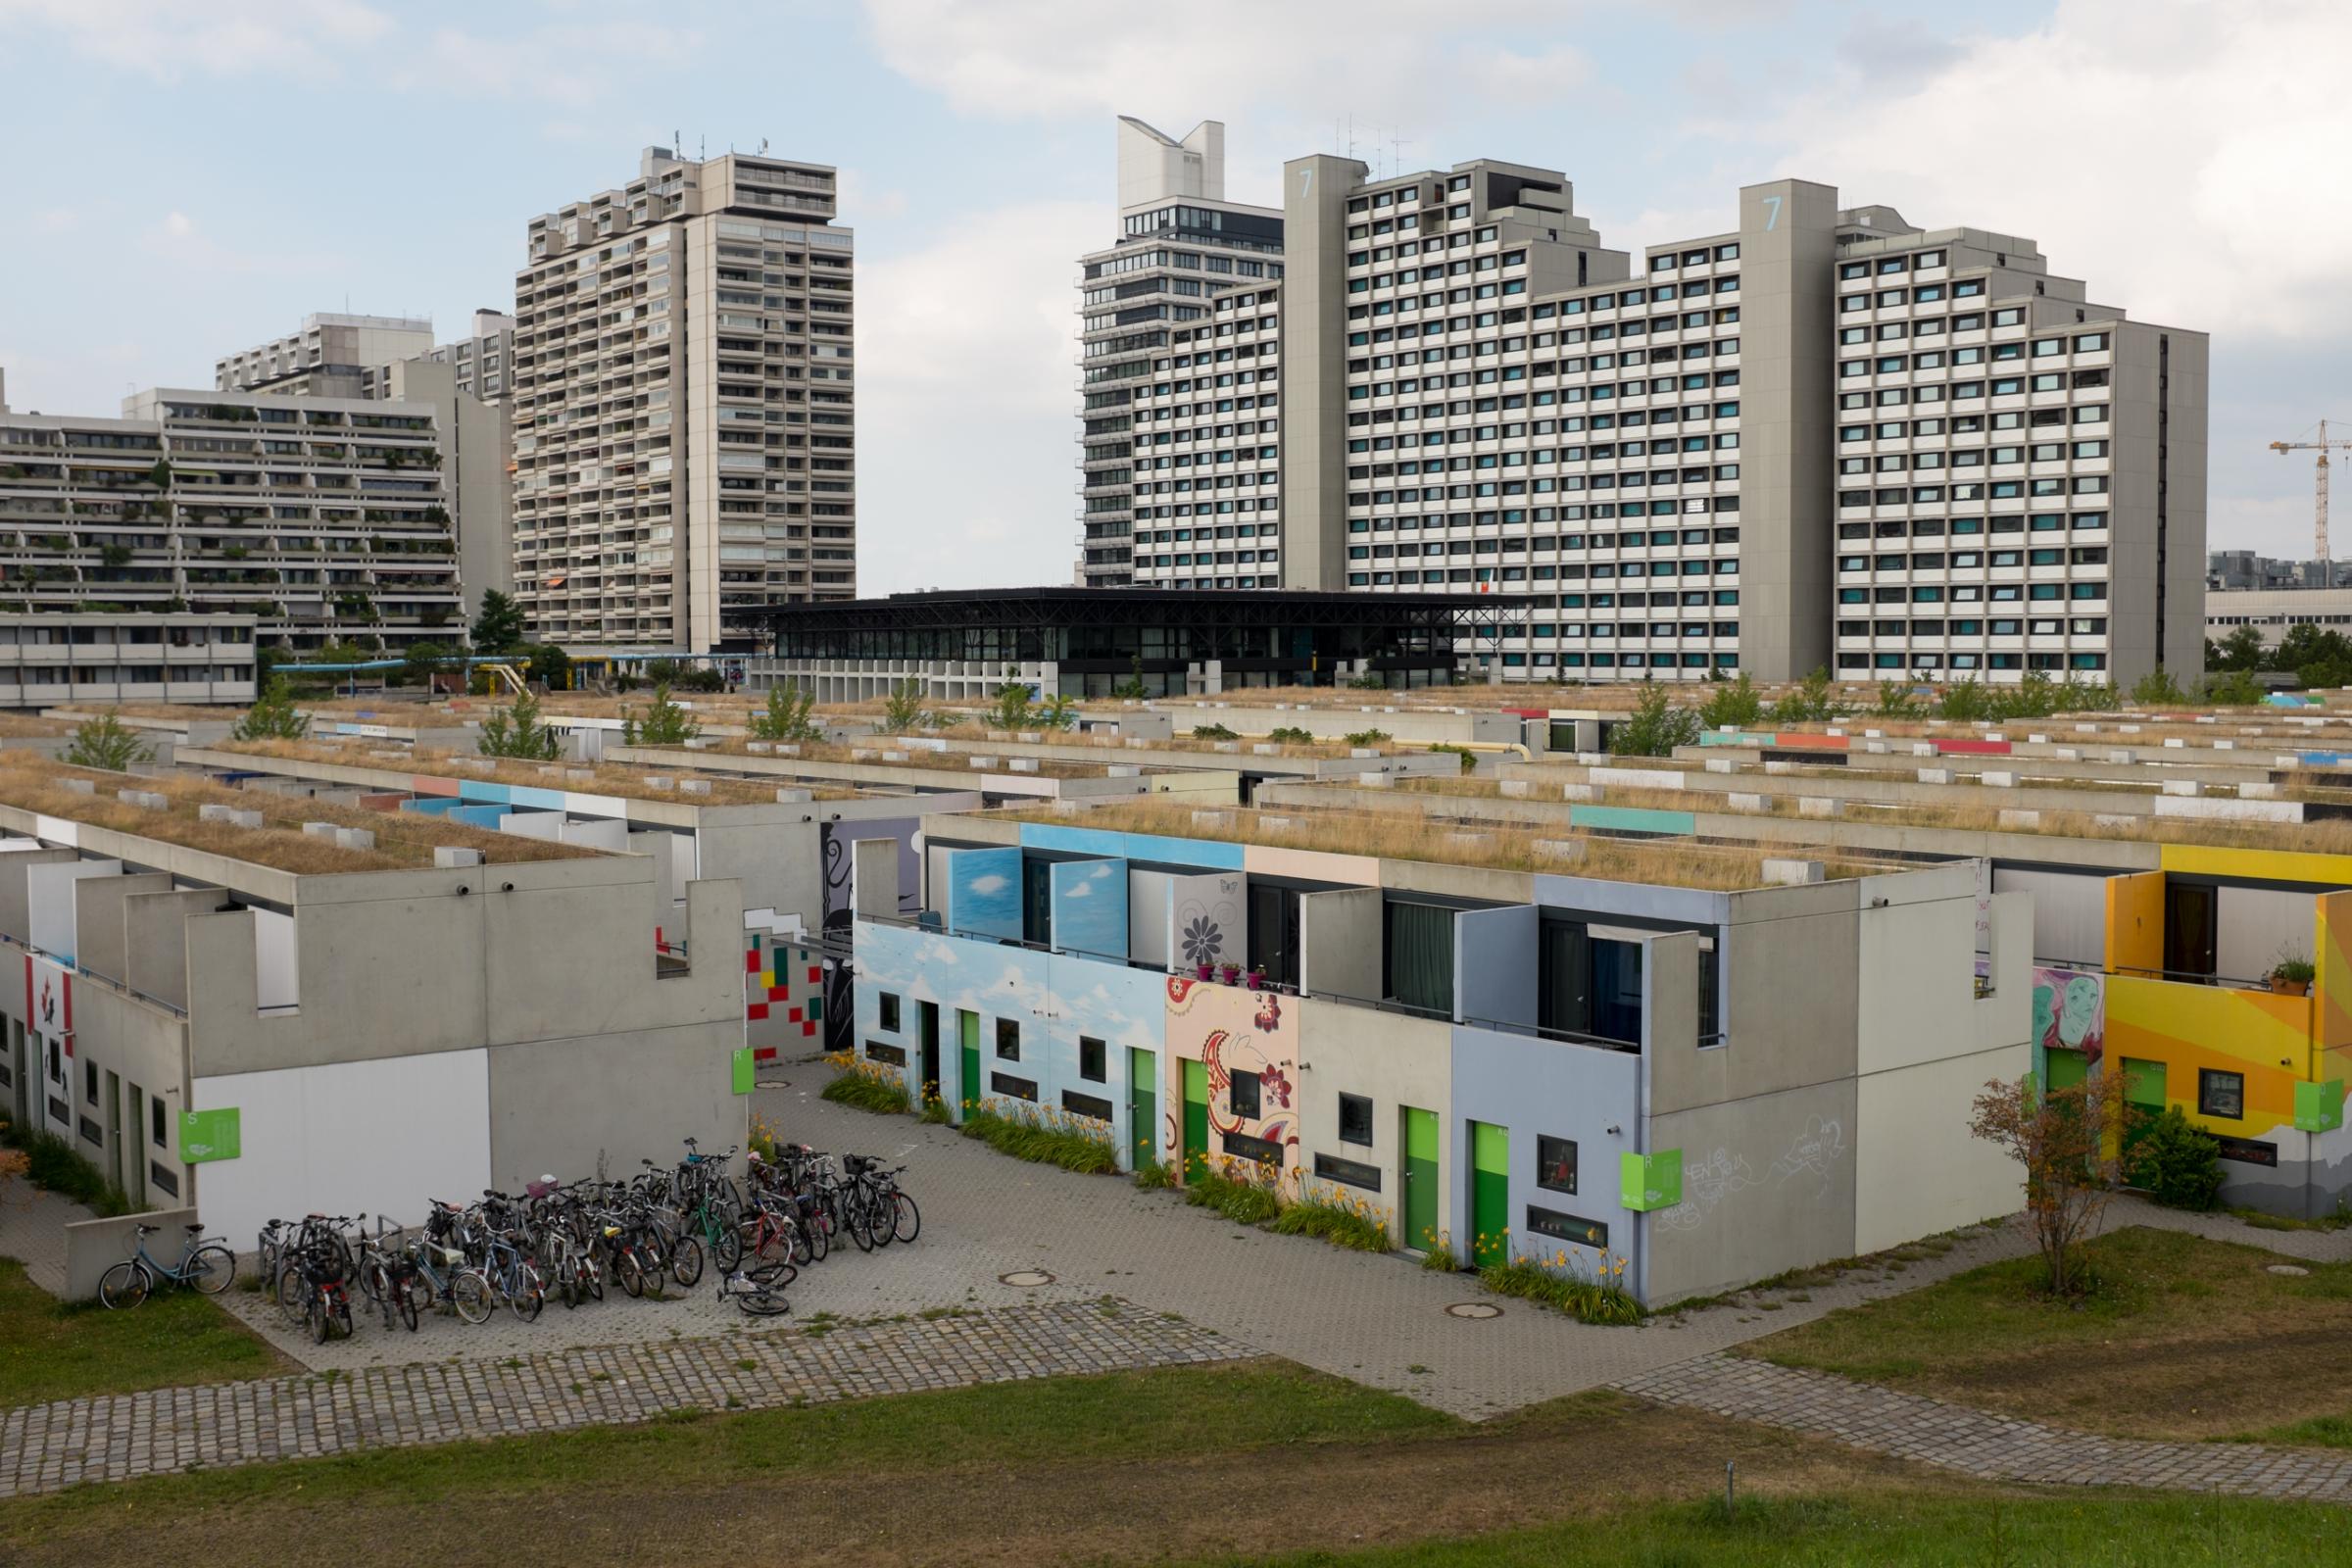 The Olympic Village in Munich, host of the 1972 Summer Olympics, photographed in July 2016.